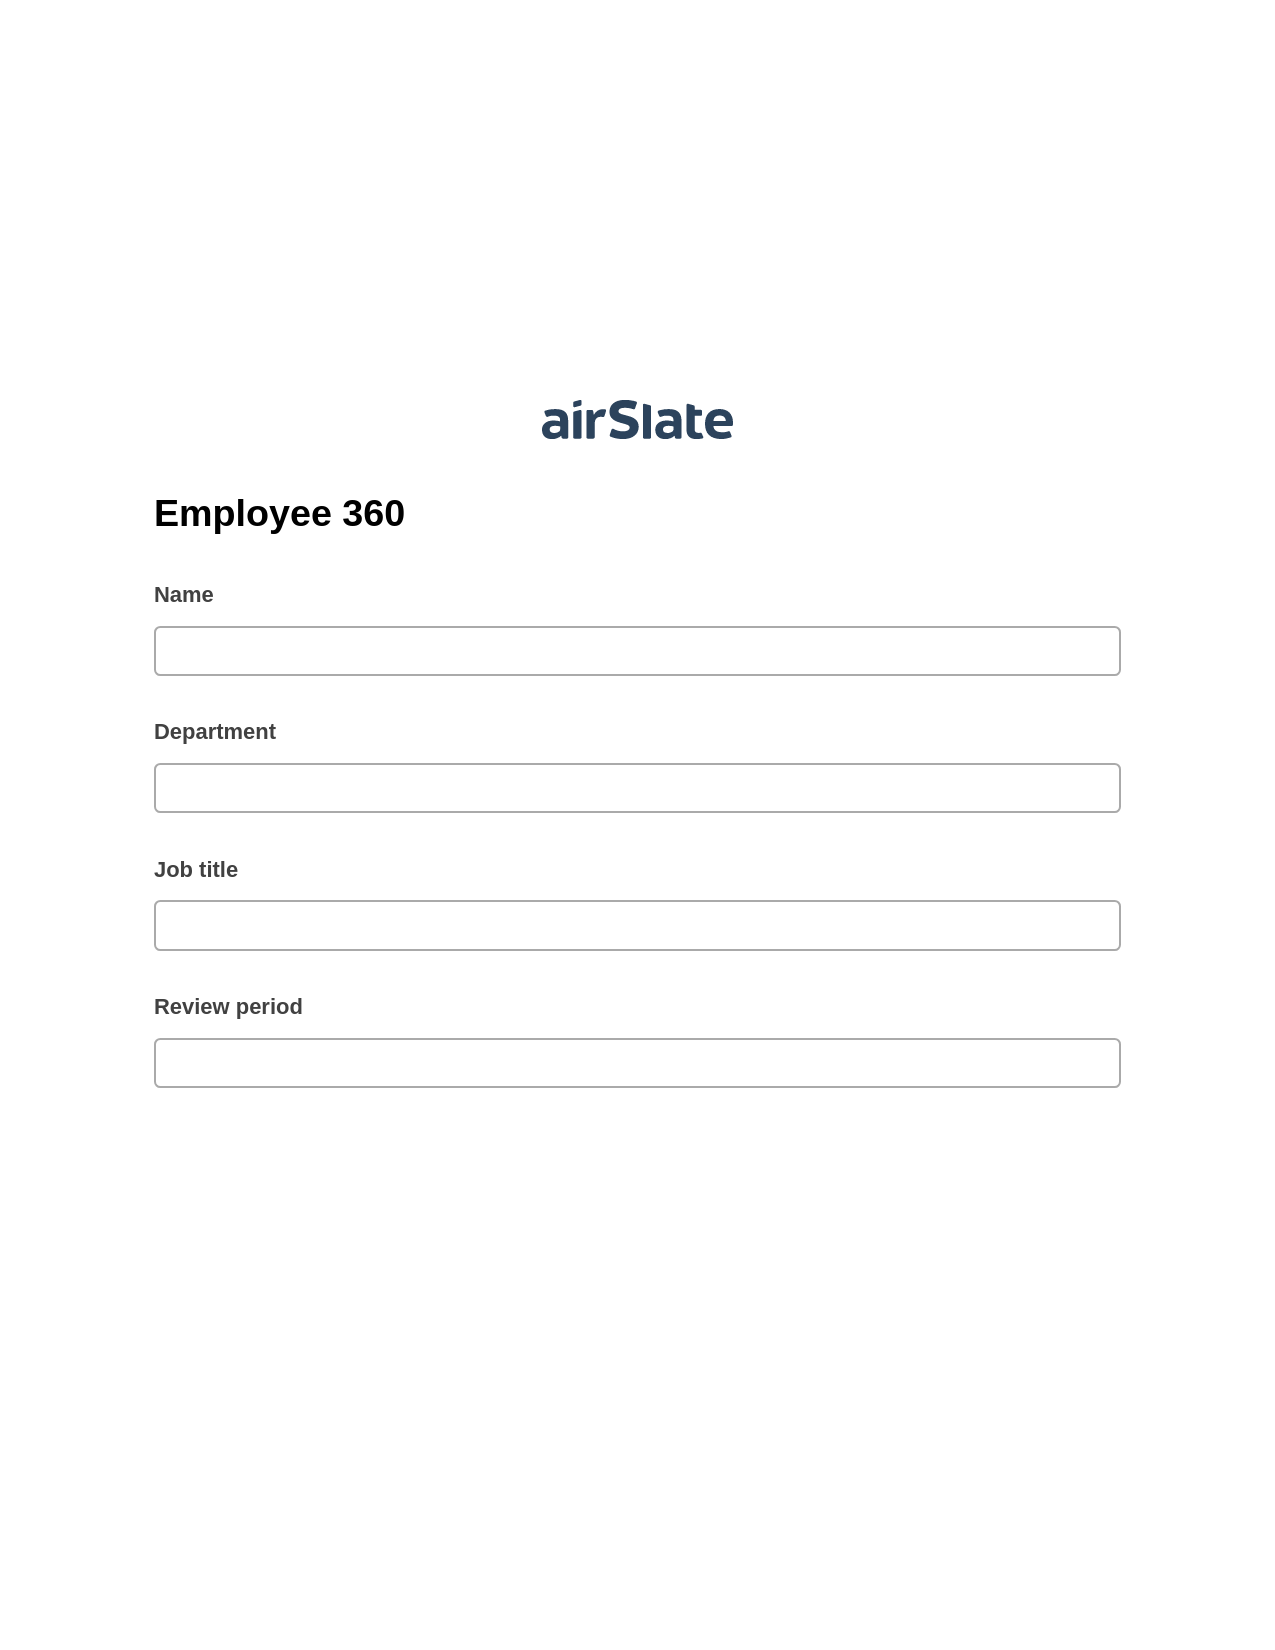 Employee 360 Prefill from NetSuite records, Export to MS Dynamics 365 Bot, Archive to Dropbox Bot